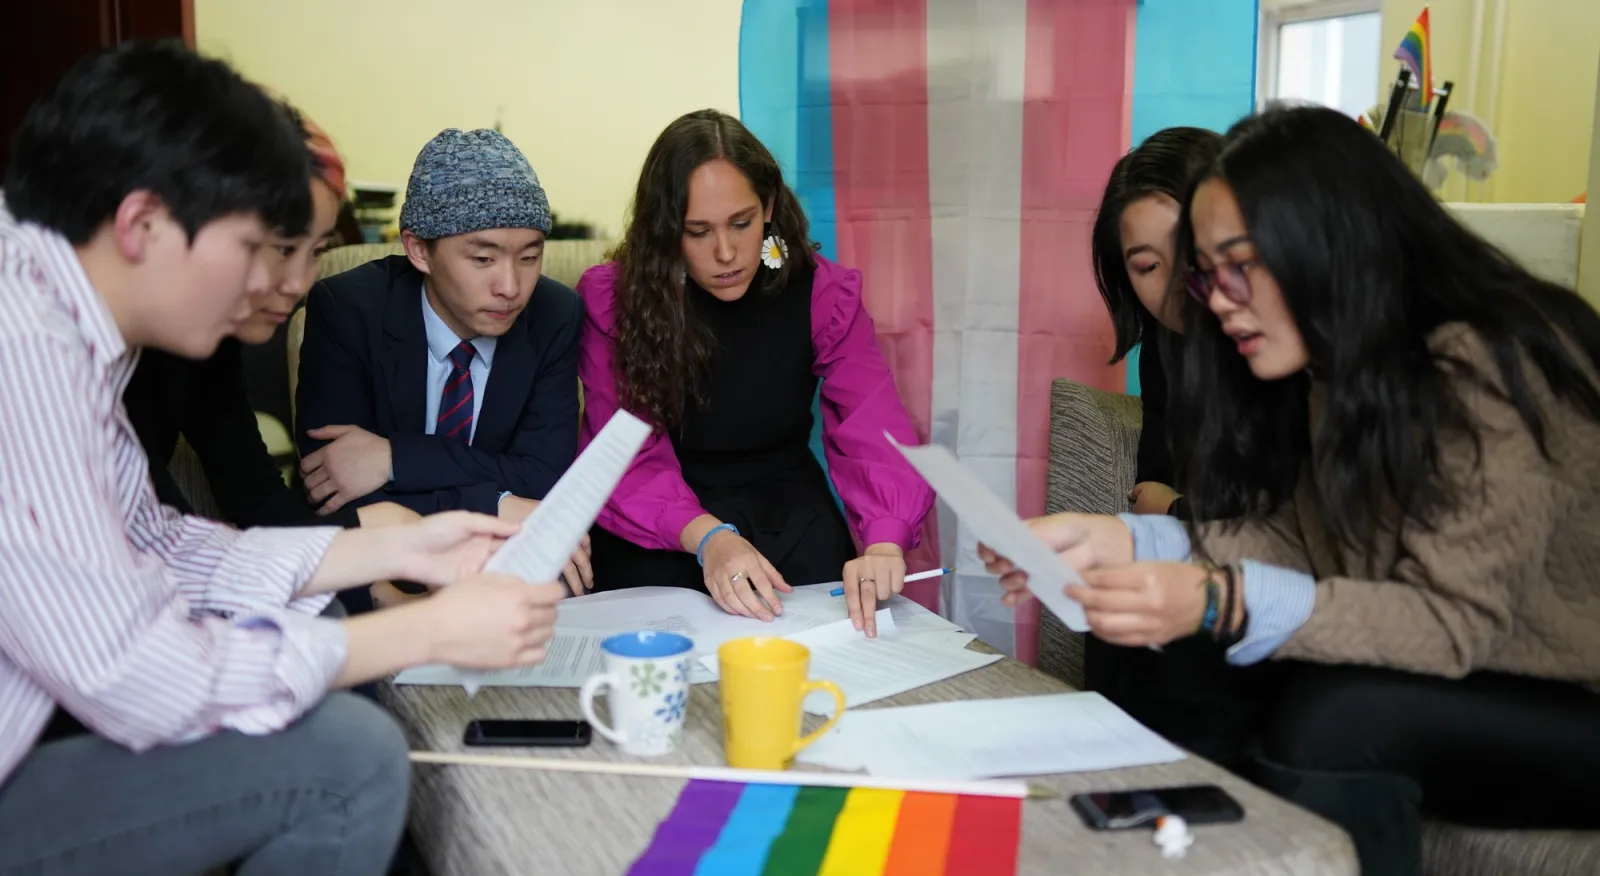 A group of young people are sitting around a small coffee table, with their heads down looking over papers. They are surrounded by a LGBTIQA+ flag and the Trans Right flag.